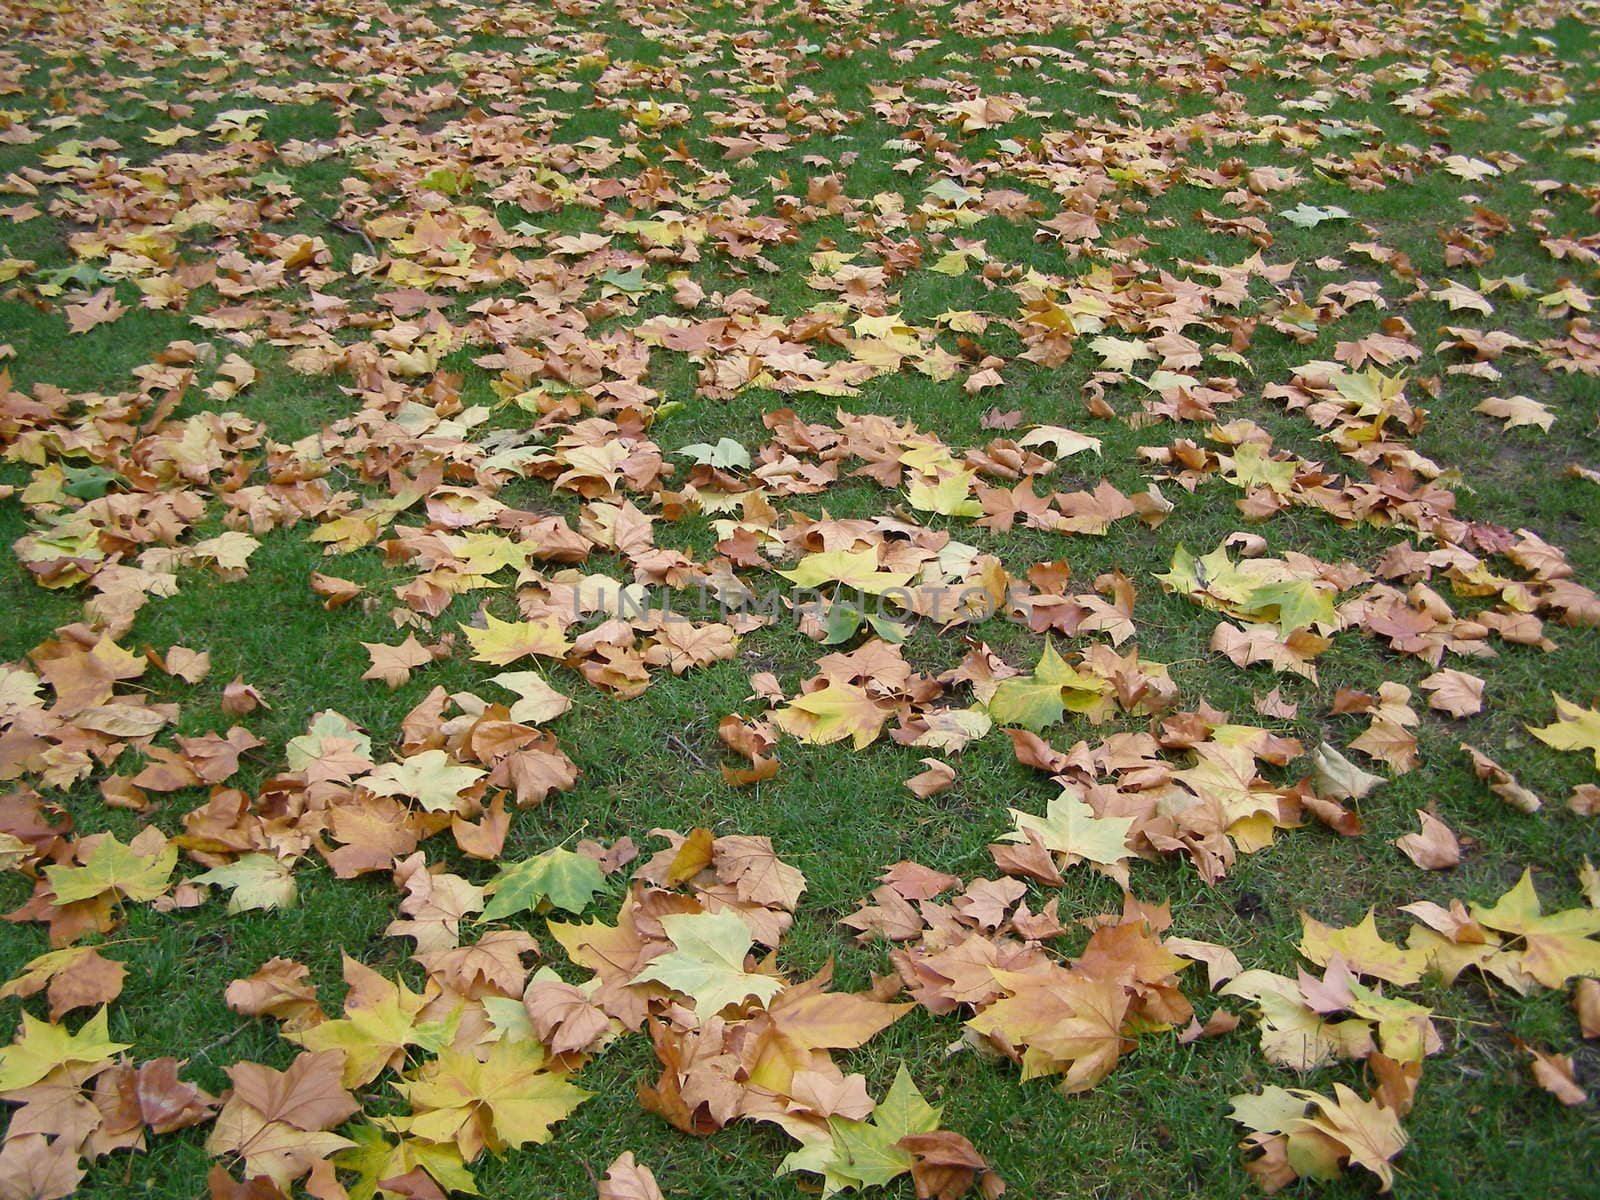 autumn or fall leaves background